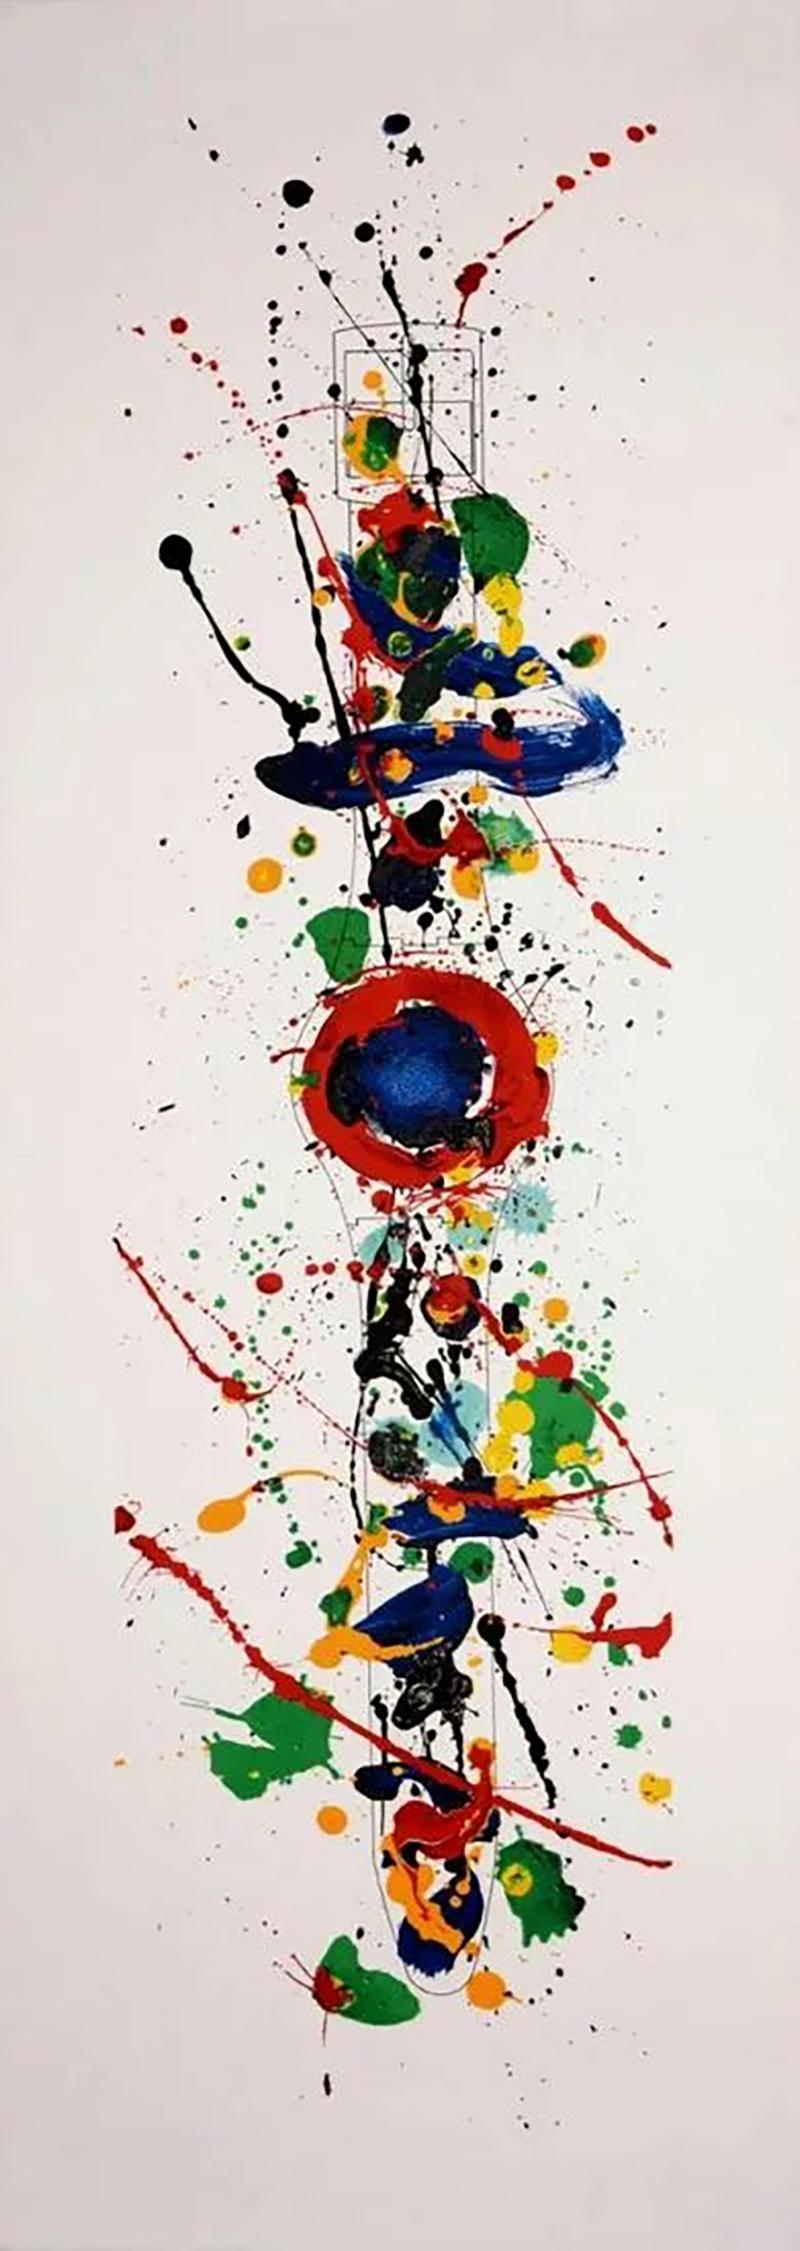 ARTIST: Sam Francis
TITLE: Swatch
DATE: 1992
MEDIUM: Lithograph on Velin paper
EDITION: From the sold out edition of 2000
SIGNED: Signed on the verso
DIMENSIONS: 30 X 8 in.
CONDITION: Excellent Condition
PRINTER: Printed by Mourlot
DESCRIPTION: